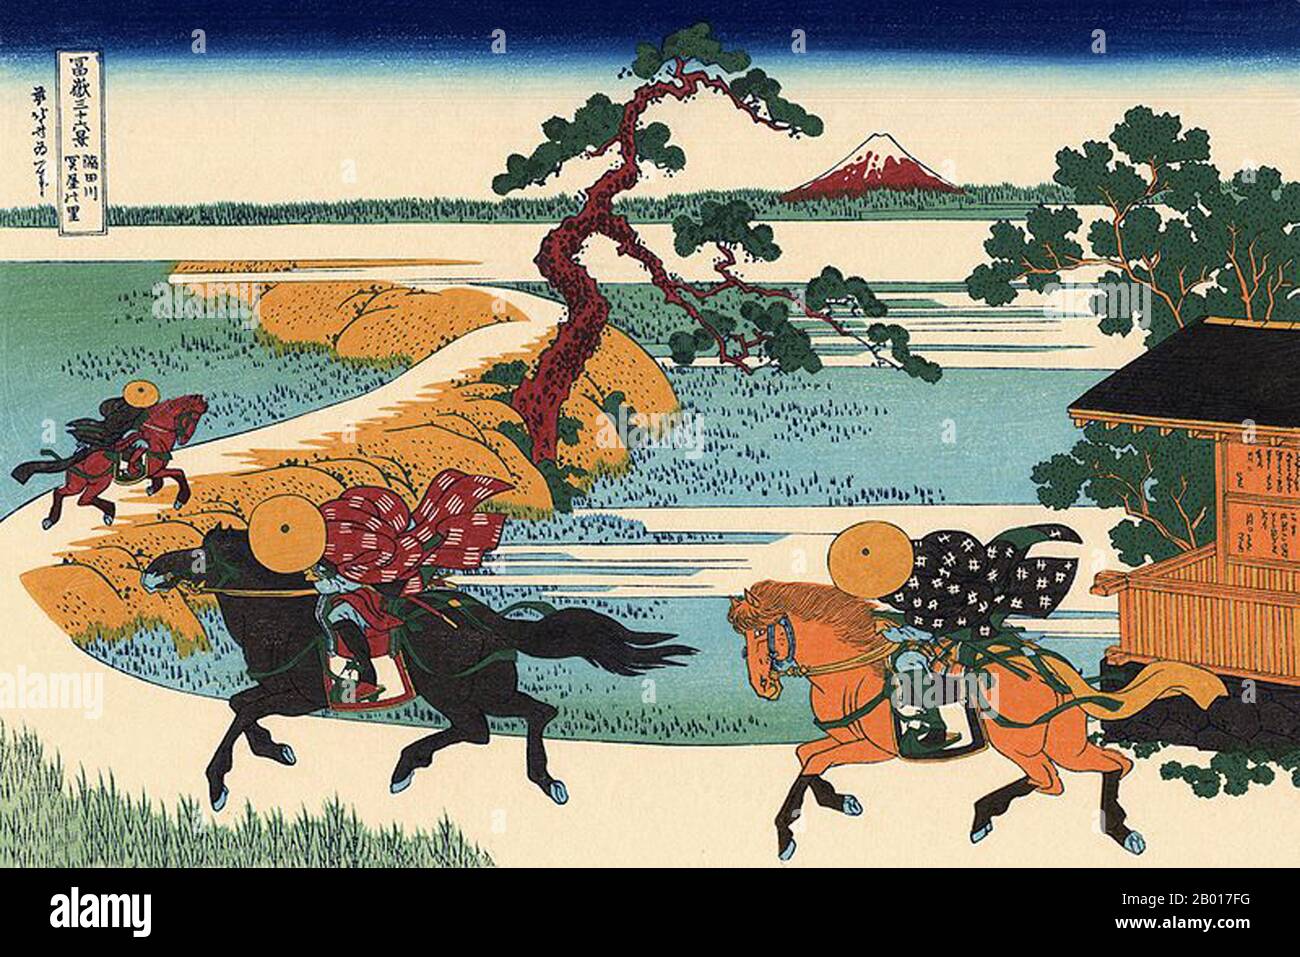 Japan: ‘Sekiya Village on the Sumida River’. Ukiyo-e woodblock print from the series ‘Thirty-Six Views of Mount Fuji’ by Katsushika Hokusai (31 October 1760 - 10 May 1849), 1830.  ‘Thirty-six Views of Mount Fuji’ is an ‘ukiyo-e’ series of woodcut prints by Japanese artist Katsushika Hokusai. The series depicts Mount Fuji in differing seasons and weather conditions from a variety of places and distances. It actually consists of 46 prints created between 1826 and 1833. The first 36 were included in the original publication and, due to their popularity, 10 more were added. Stock Photo